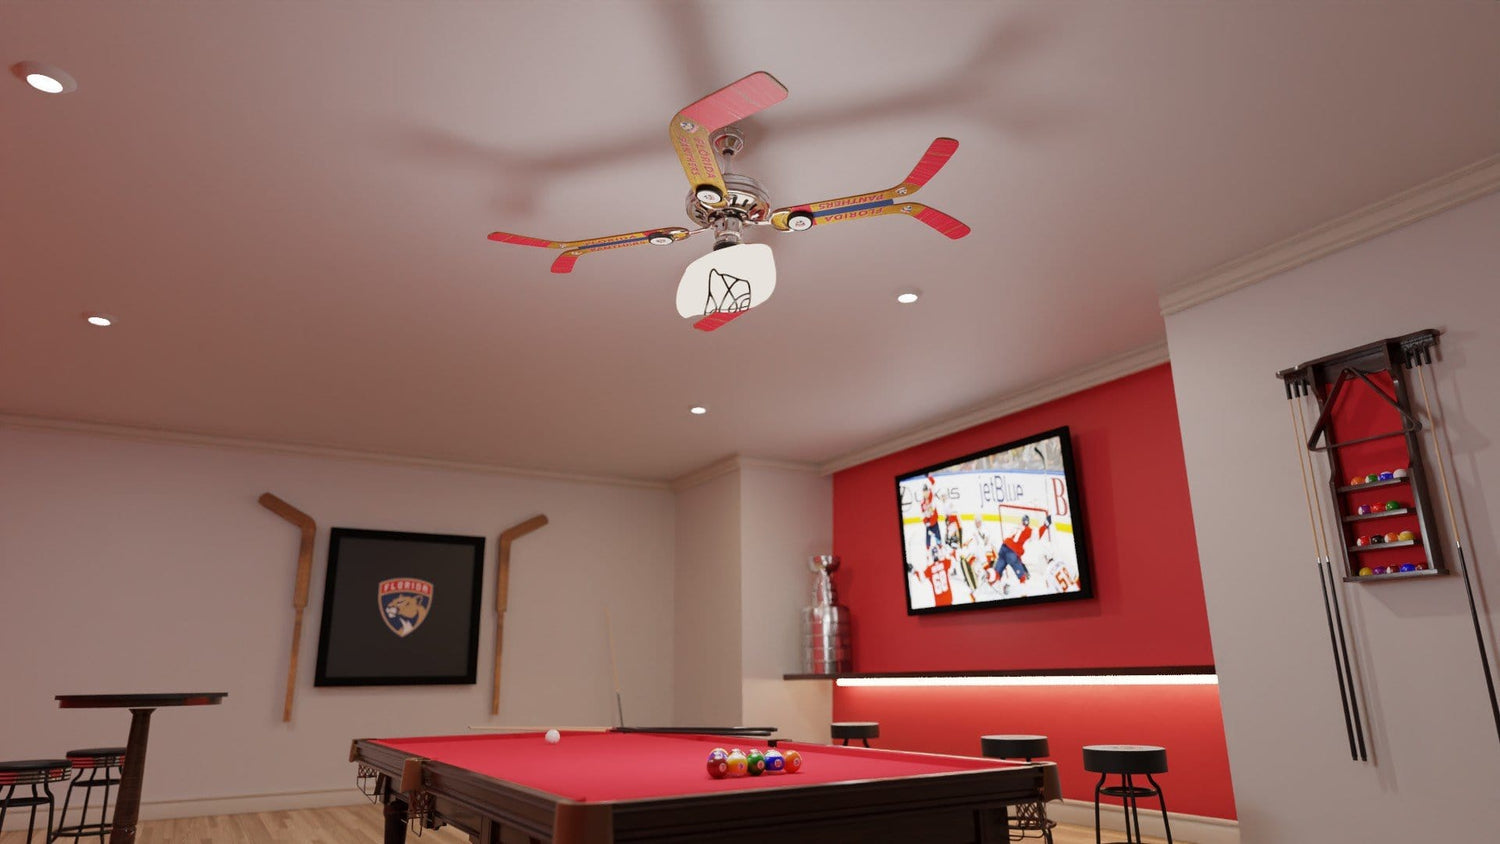 Florida Panthers® NHL Hockey Ceiling Fan – Ultimate Hockey Fans